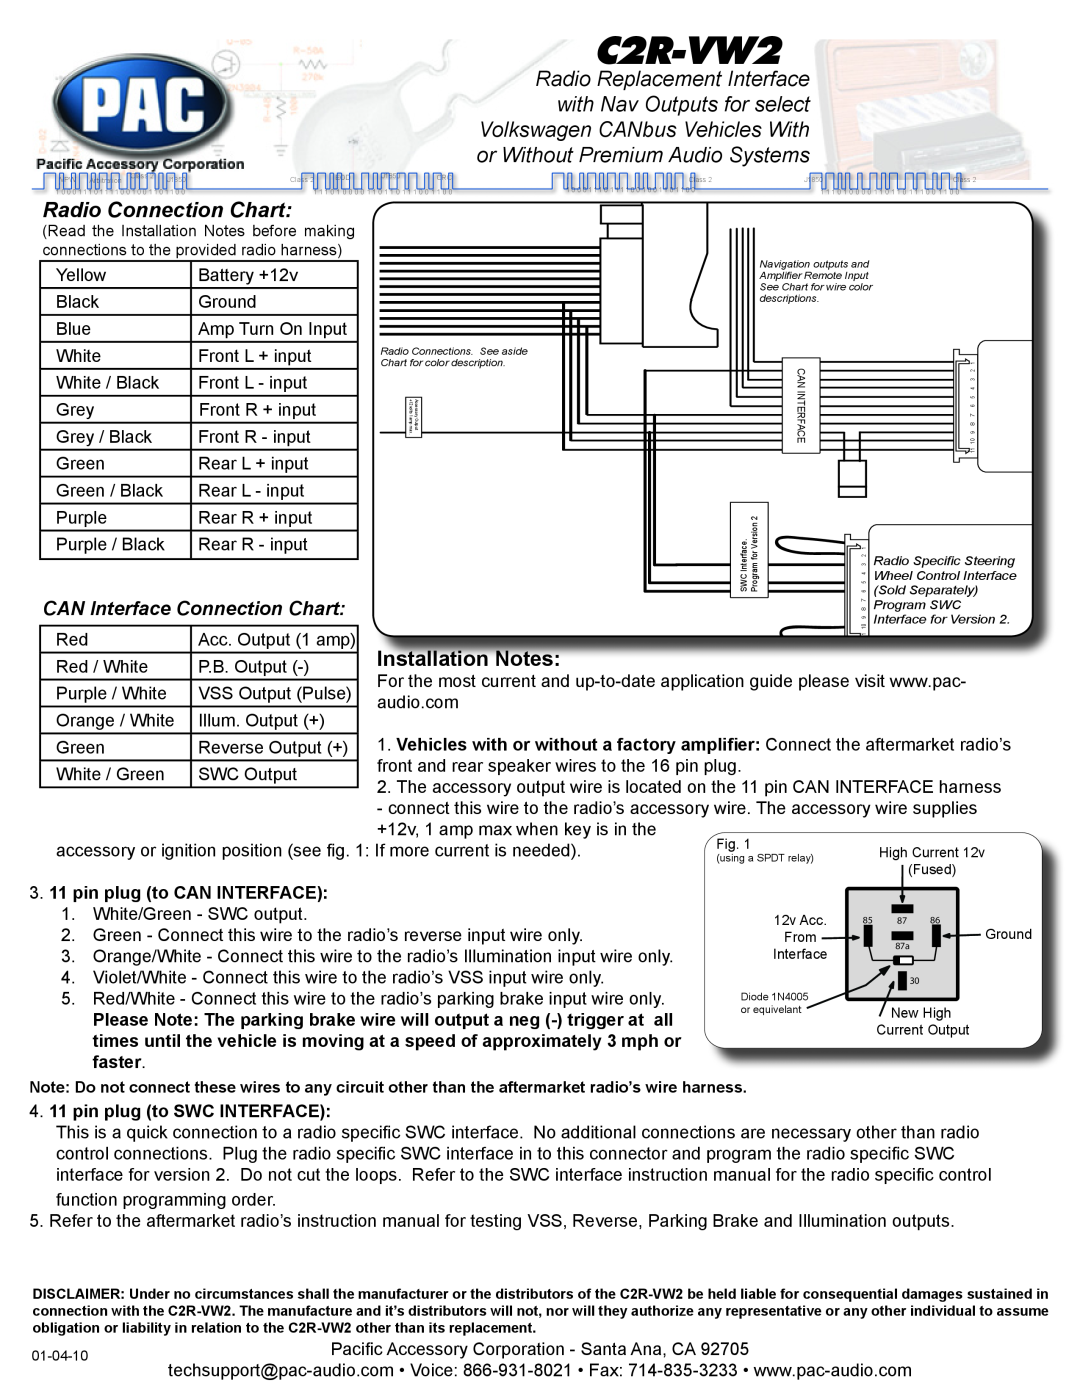 PAC C2R-VW2 instruction manual Radio Connection Chart, Installation Notes, CAN Interface Connection Chart, faster 